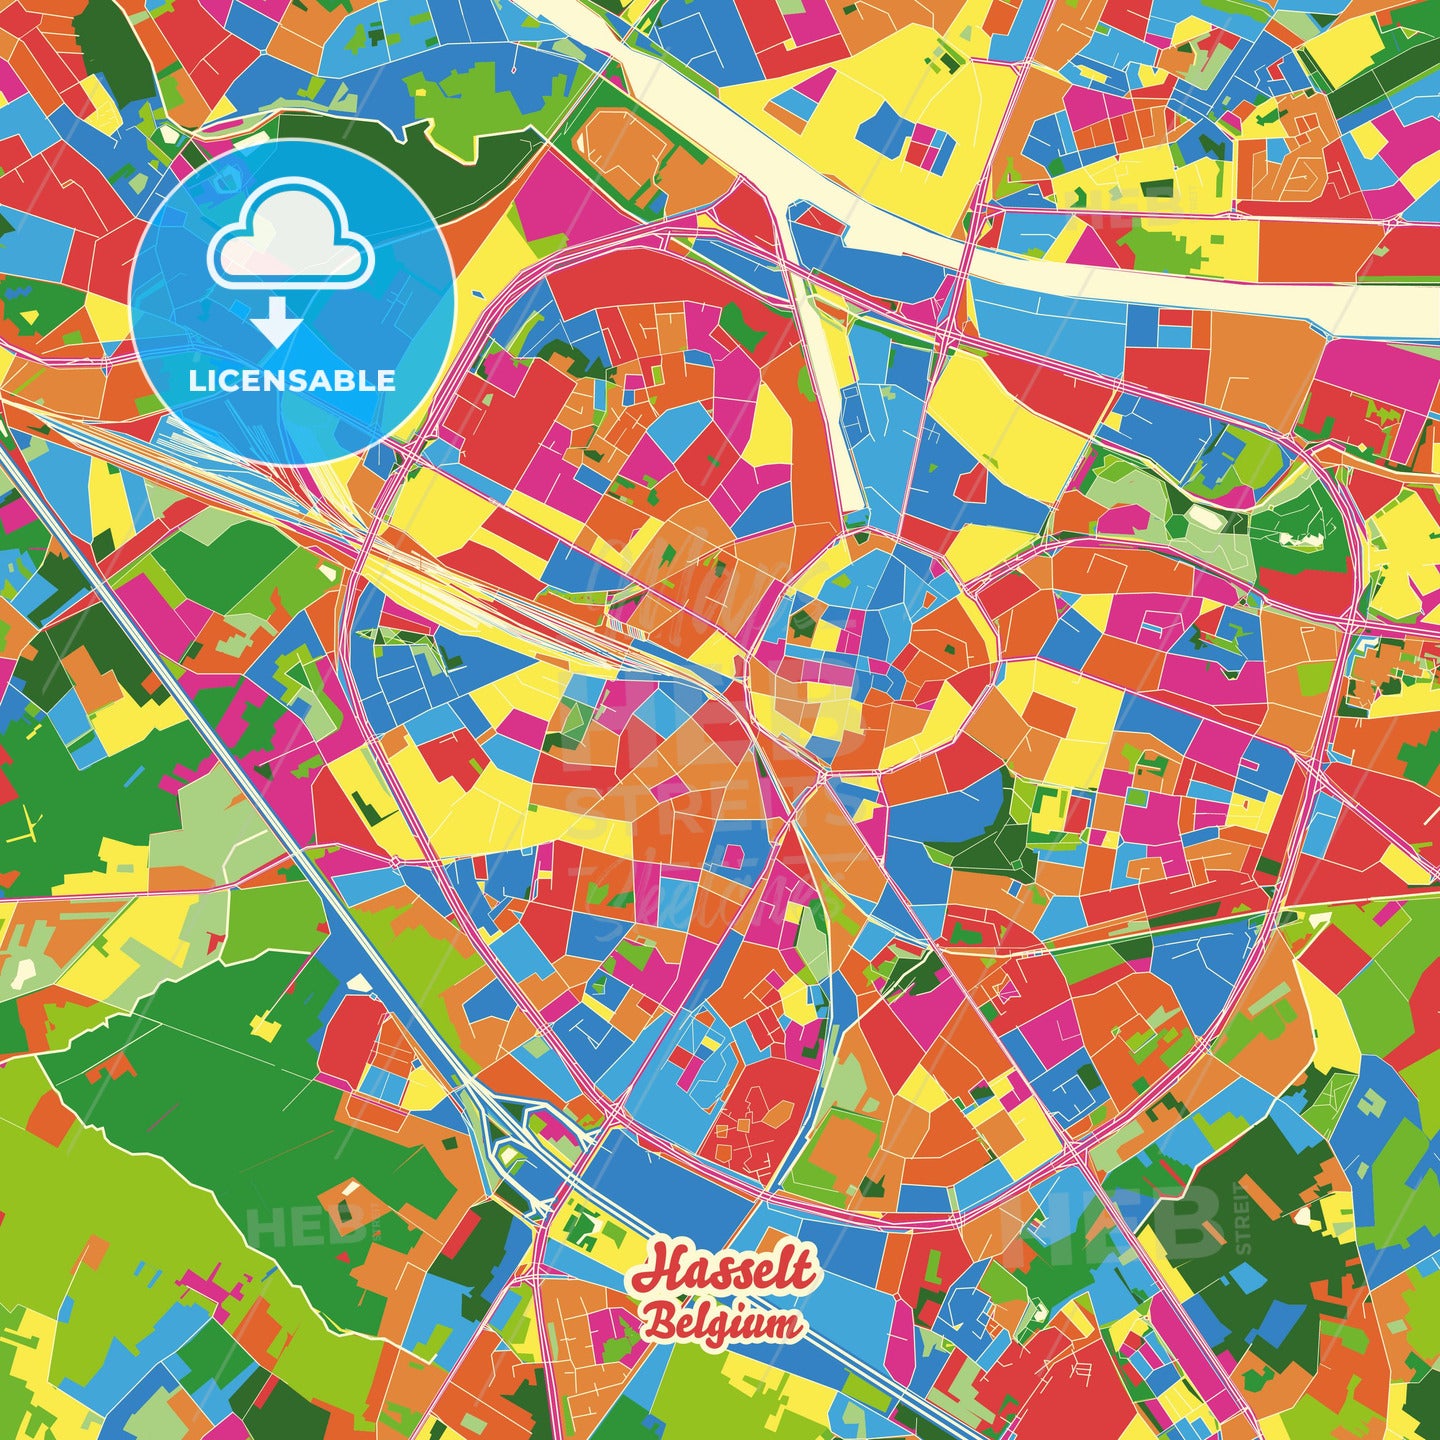 Hasselt, Belgium Crazy Colorful Street Map Poster Template - HEBSTREITS Sketches